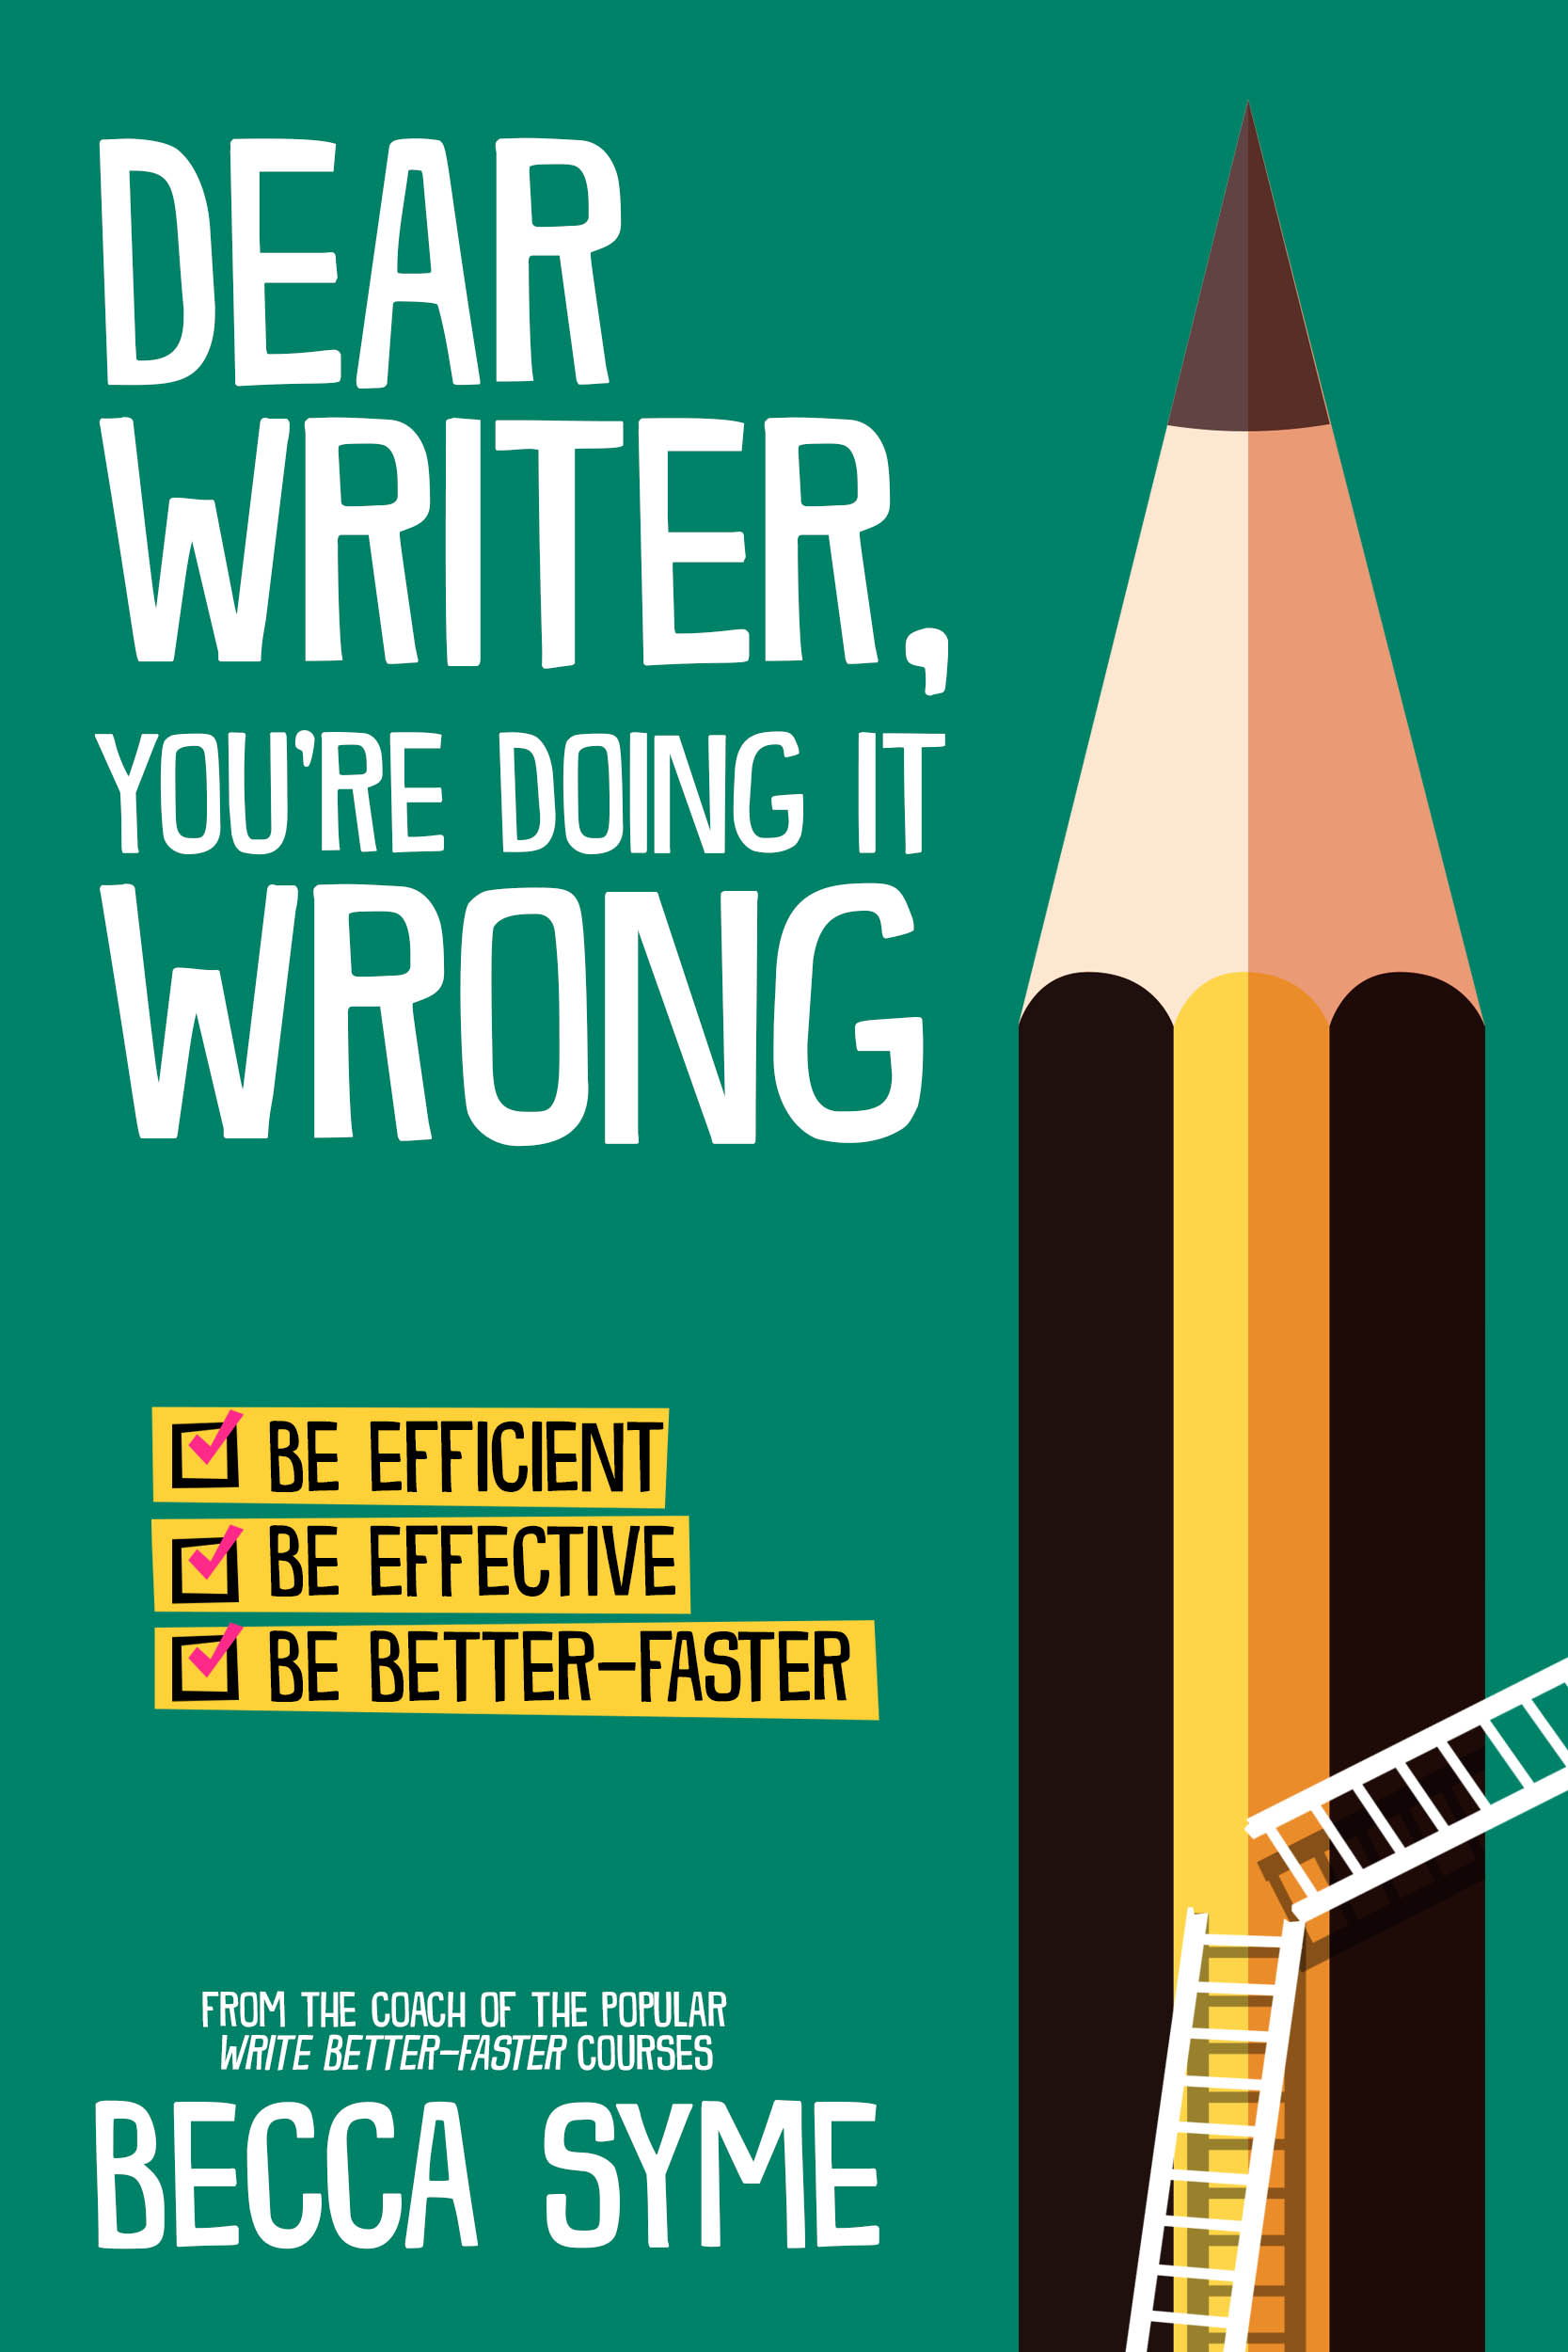 Dear Writer, You’re Doing It Wrong by Becca Syme